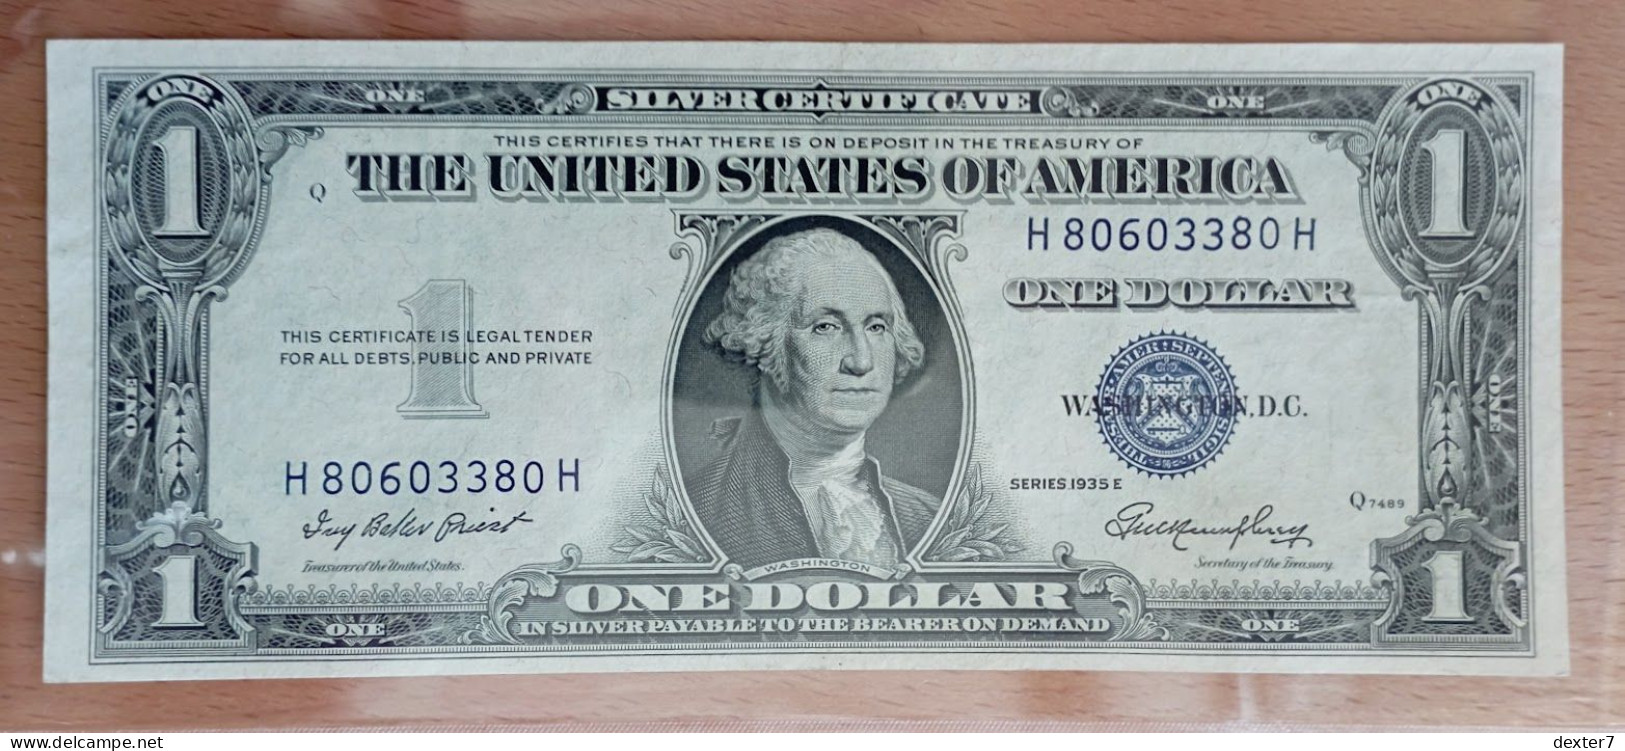 USA 1 Dollar 1935-E Silver Certificate - Federal Reserve Notes (1928-...)